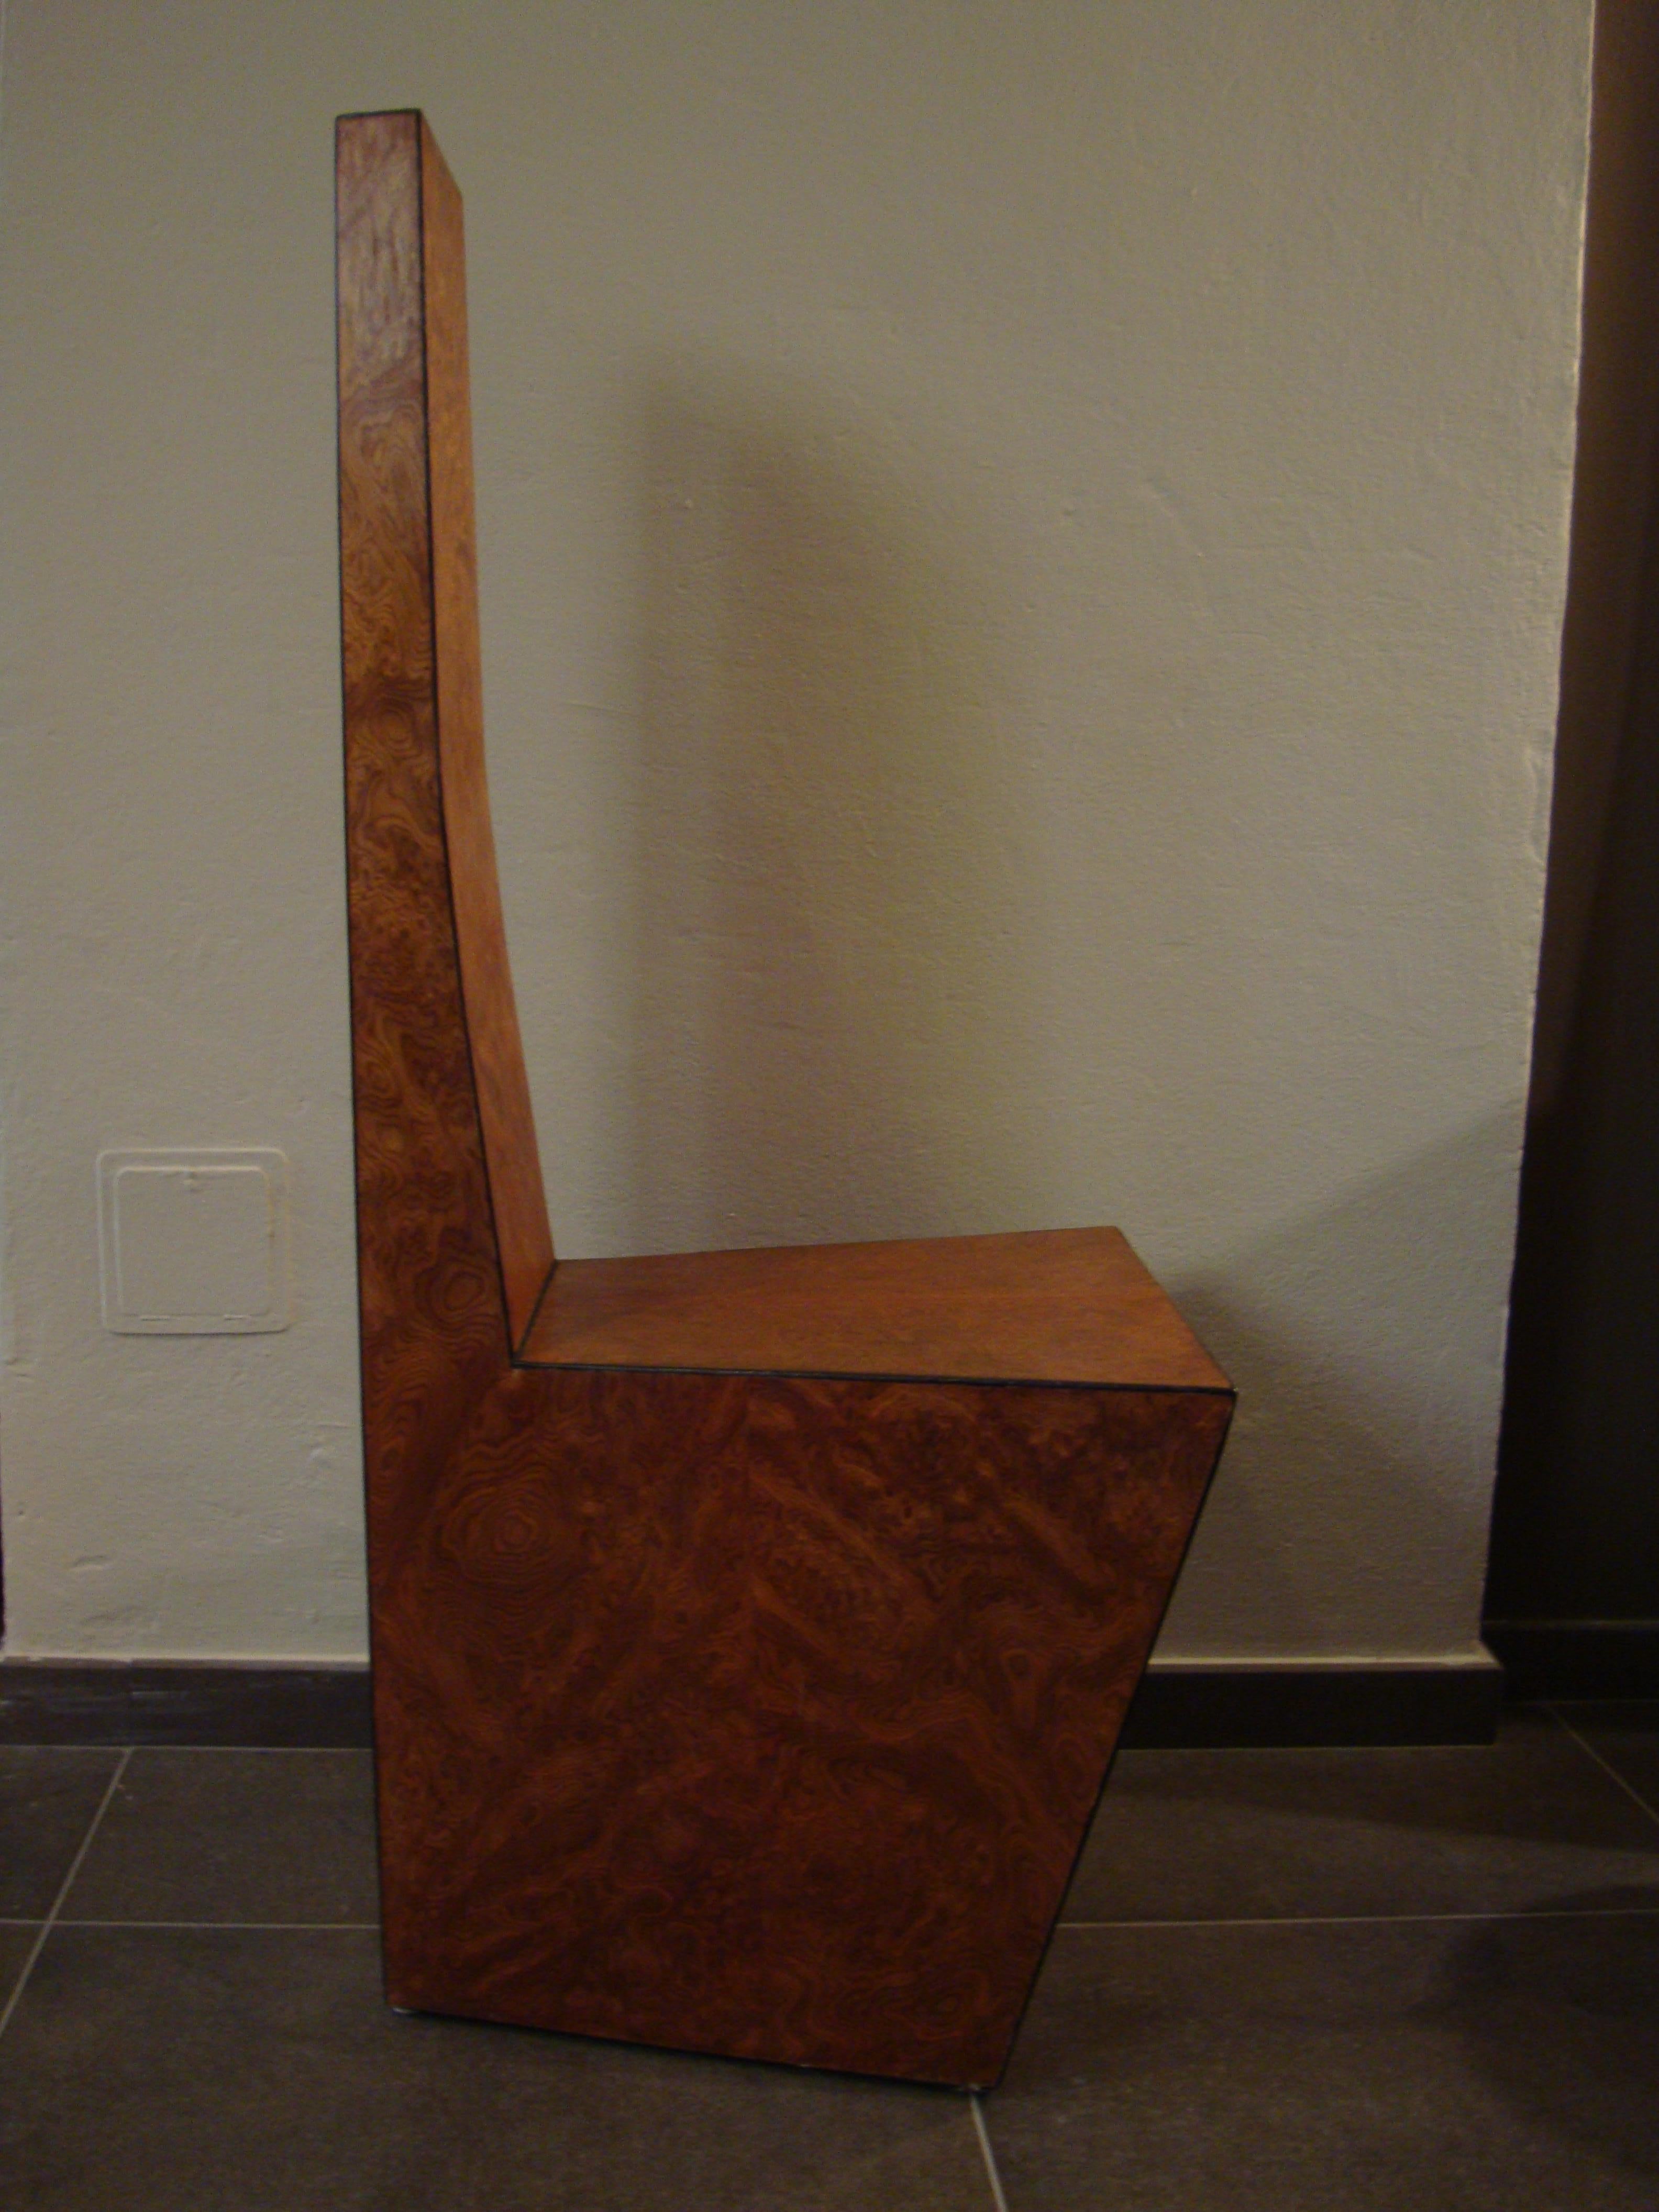 Sculpture chair produced for a Milanese residence, circa 1980. Outlined on the edges by a slight black thread. This is a single and unique piece created by a crafted ebanist maker.